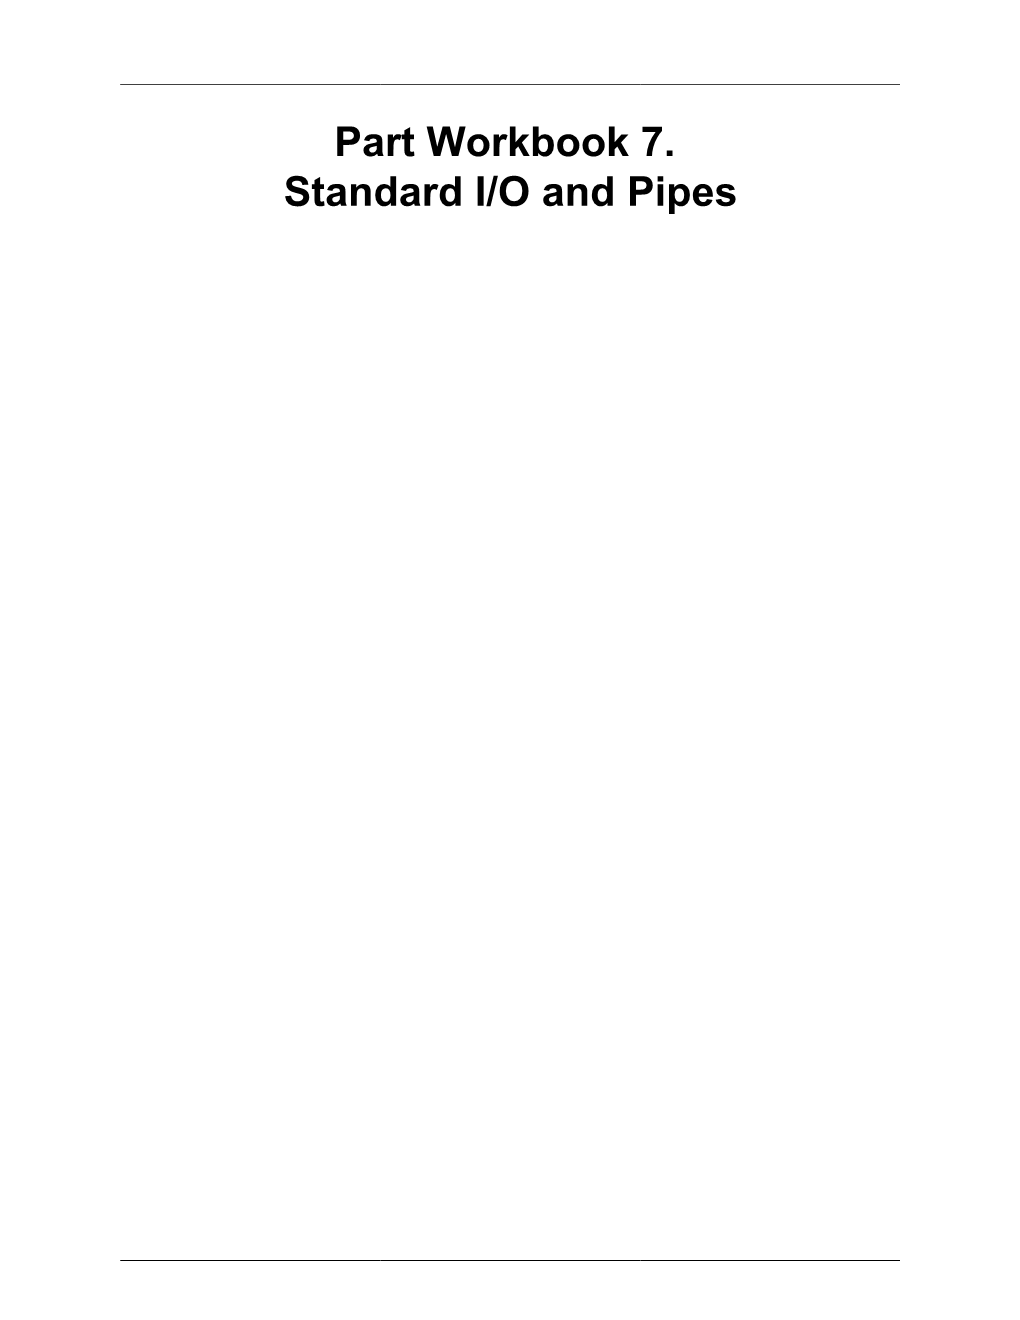 Part Workbook 7. Standard I/O and Pipes Table of Contents